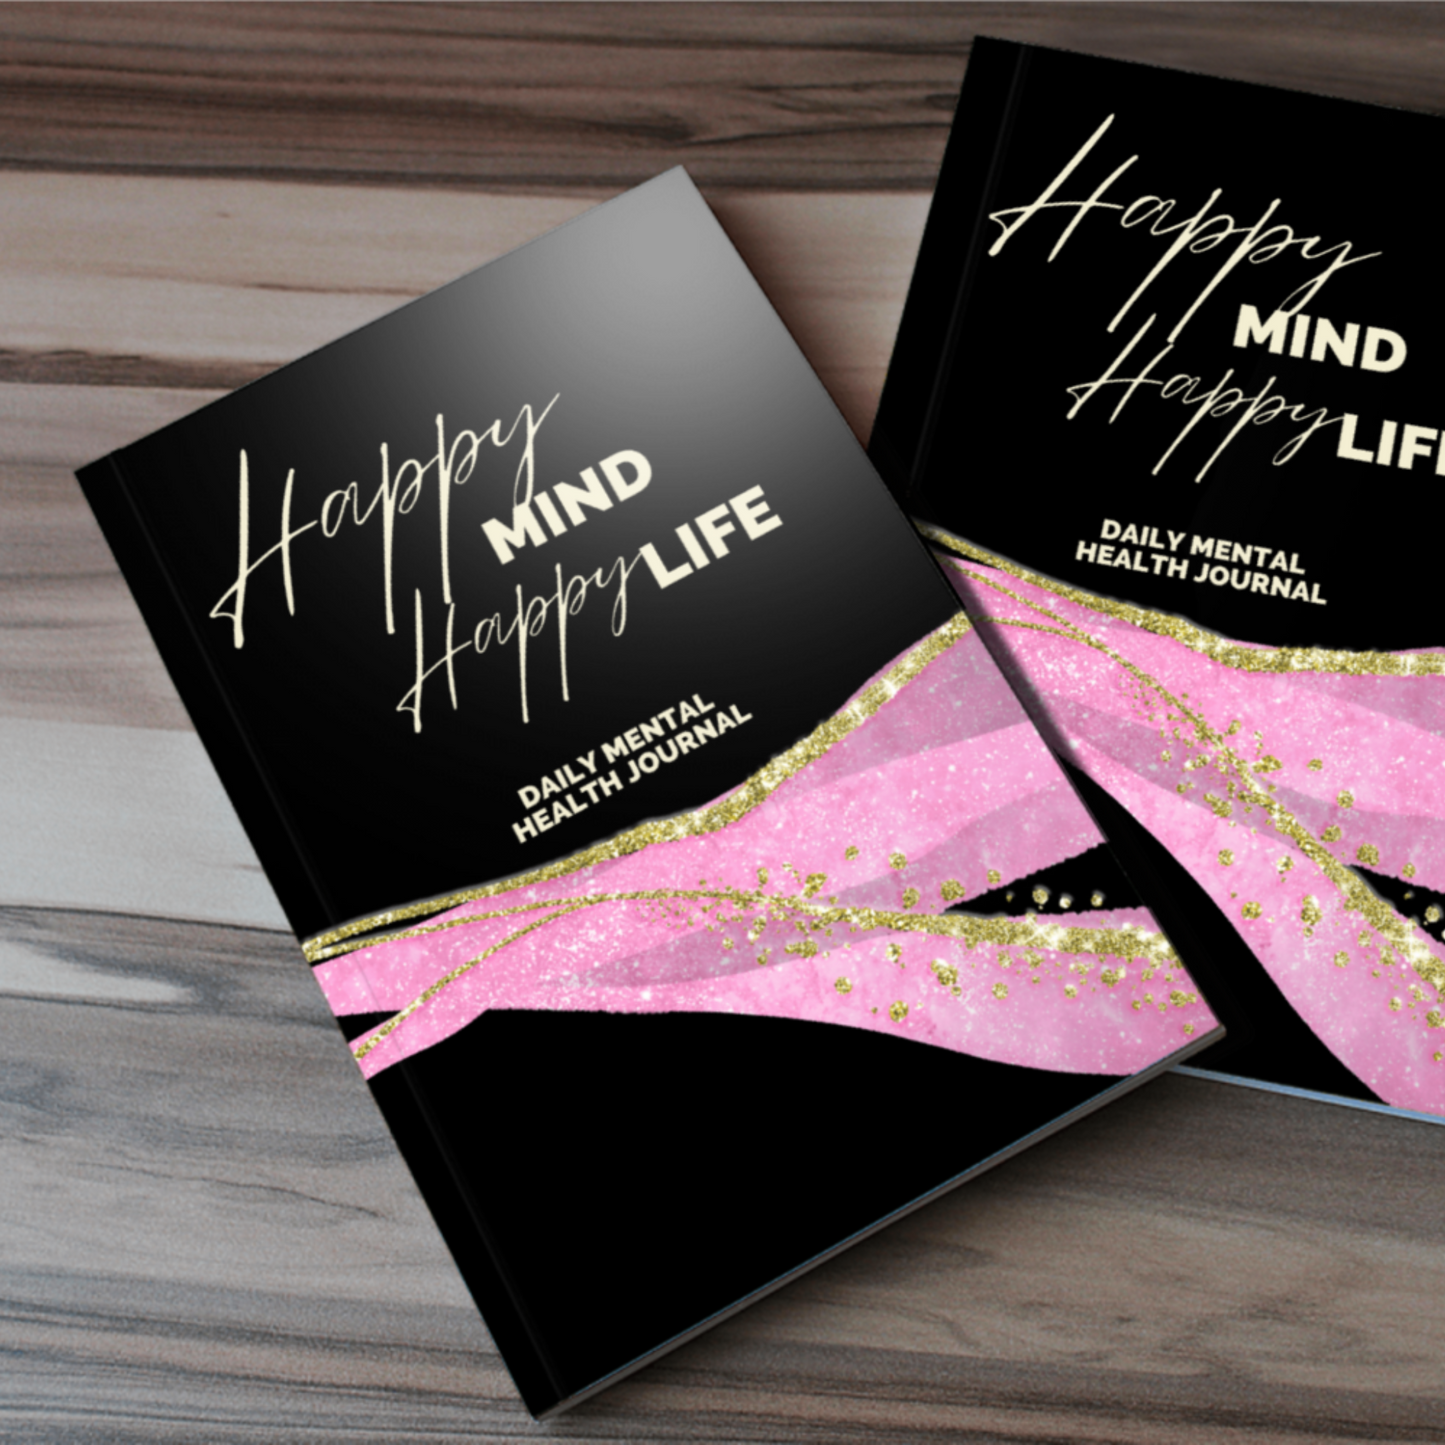 Happy Mind Happy Life Mental Health Journal for KDP Amazon & The Book Patch